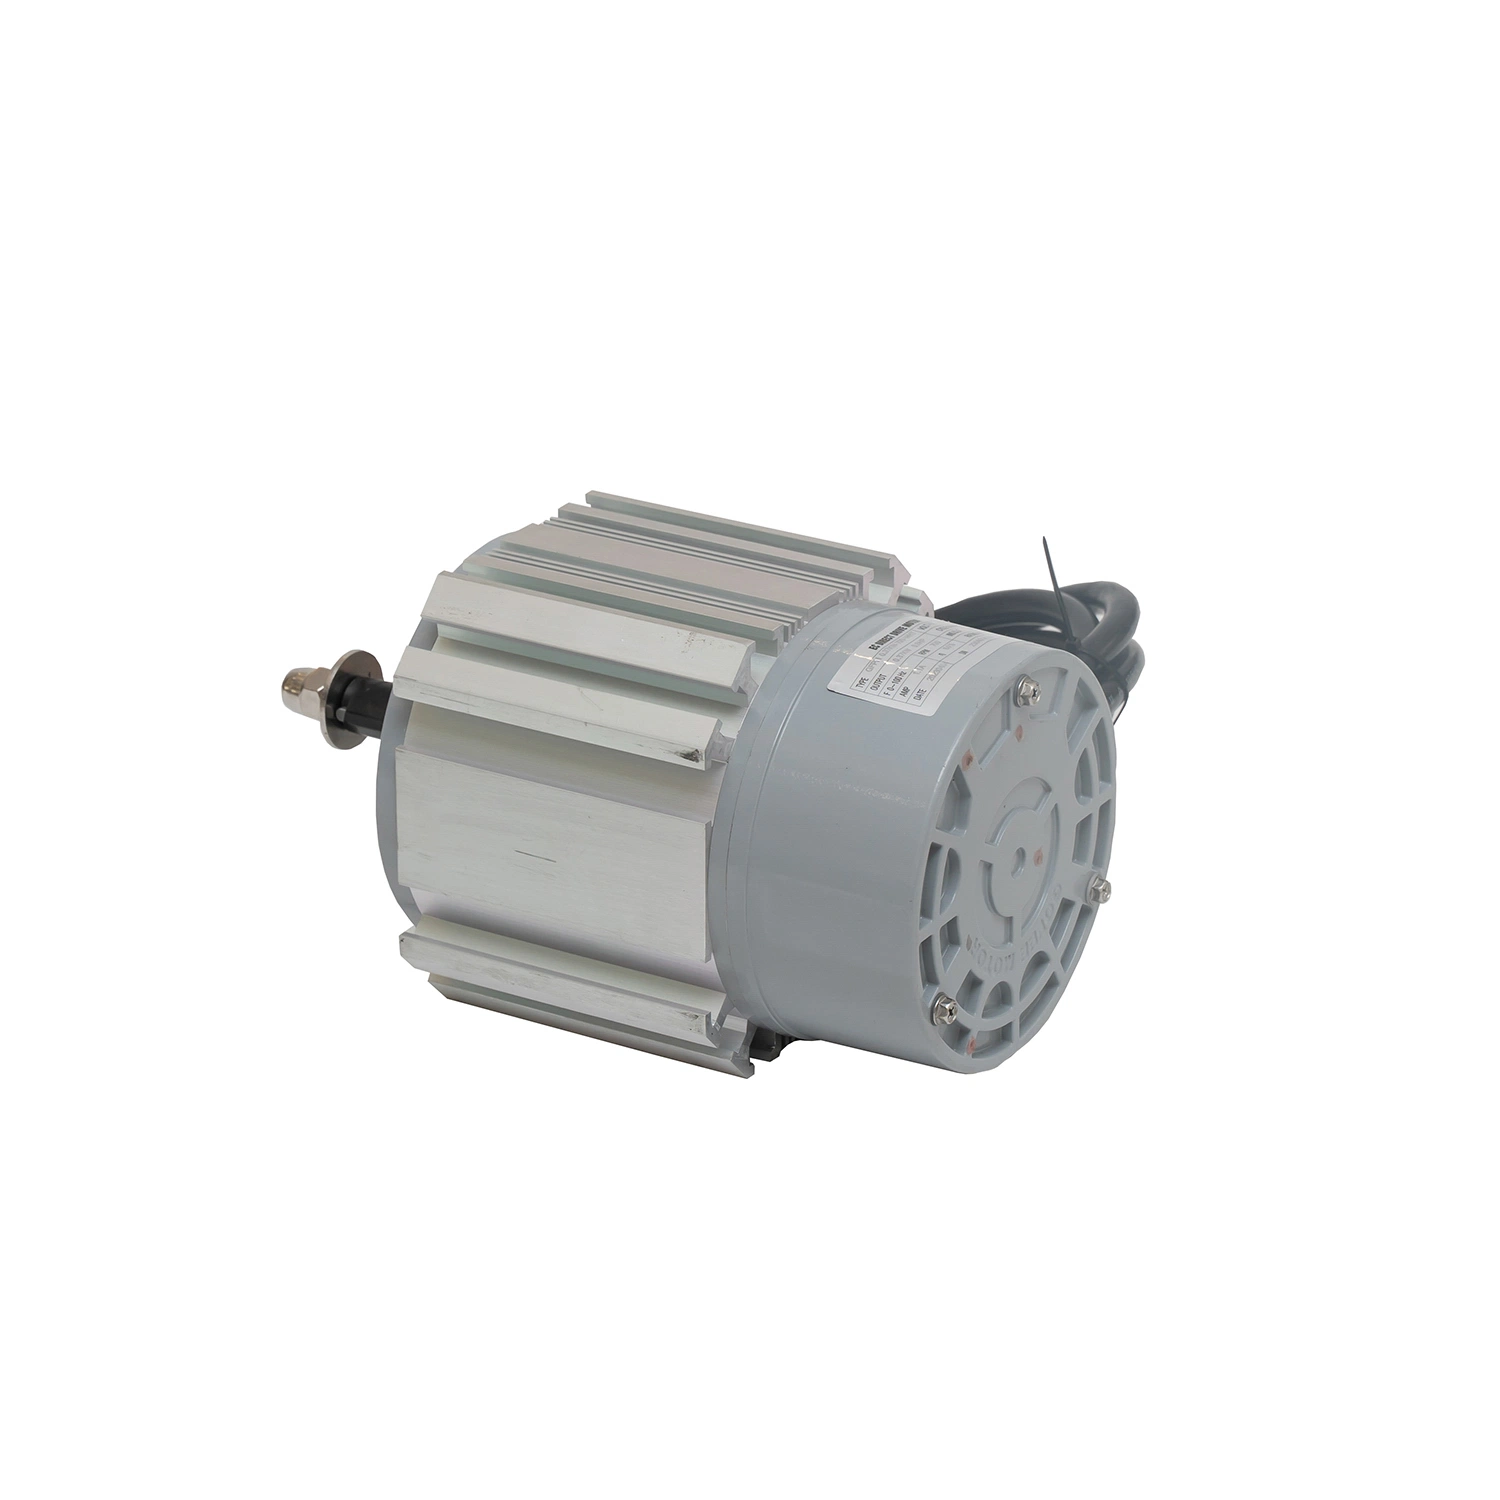 CE UL Certified Permanent Magnet Brushless Frequency Conversion Ec Motor for Ventilation Exhaust Fans Poultry Livestock Farm